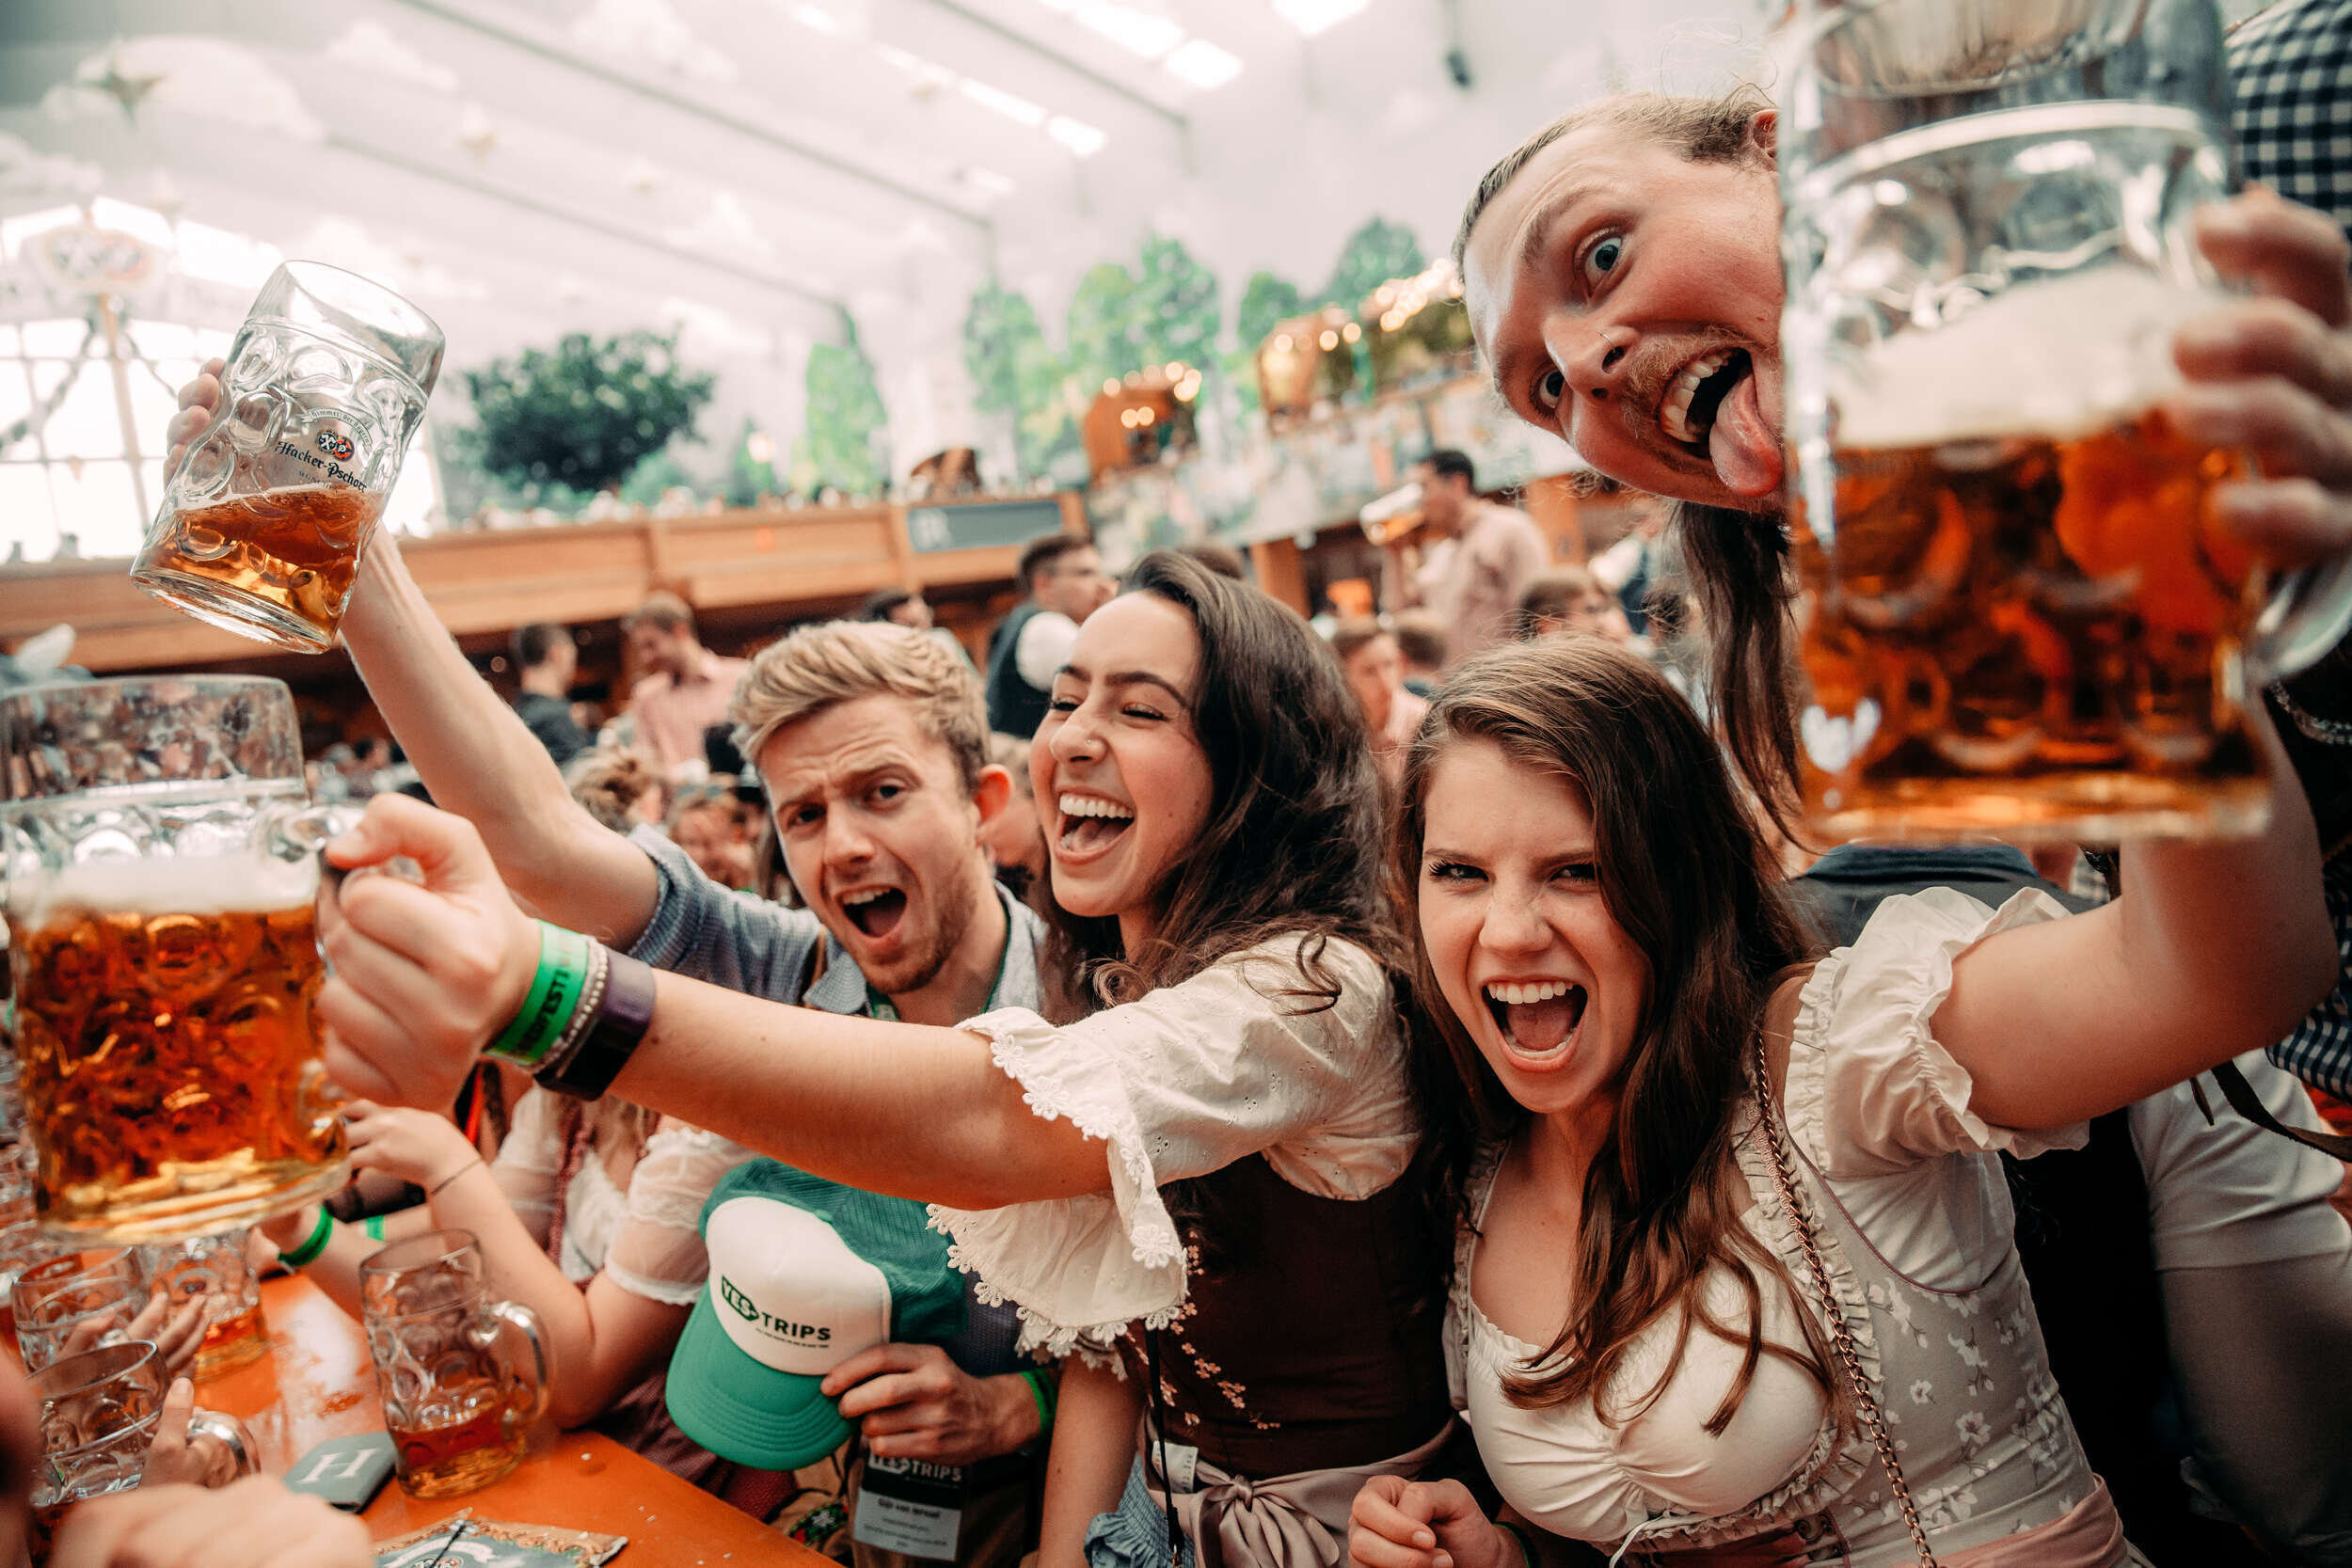 Looking to Buy German Hats in Bulk This Oktoberfest: Captivate Your Guests With These Must-Have Styles